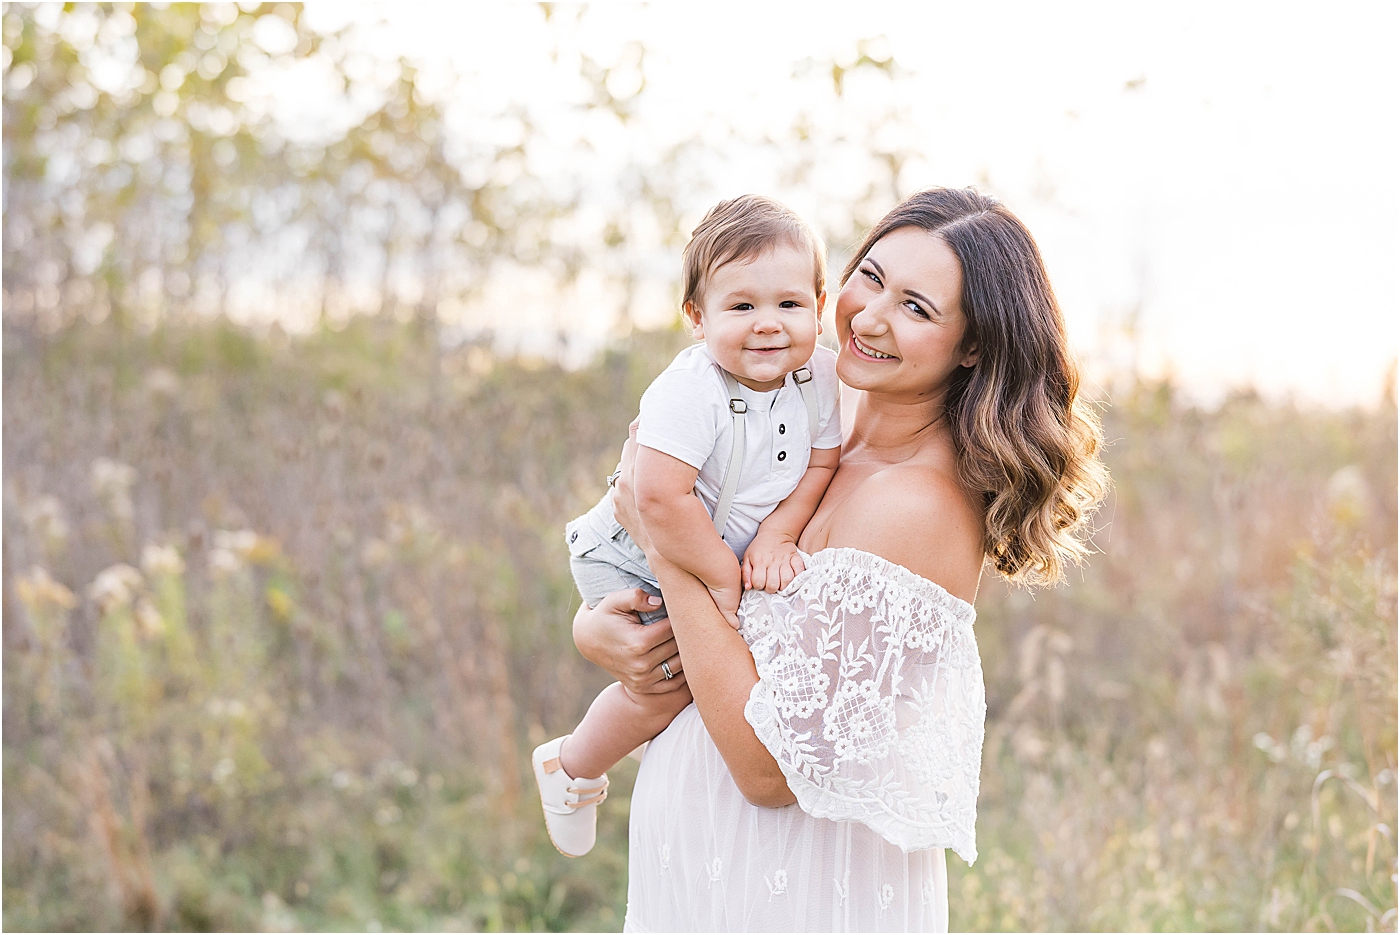 Mom with one year old son during sunset family session with Geist Family Photographer, Lindsay Konopa Photography.